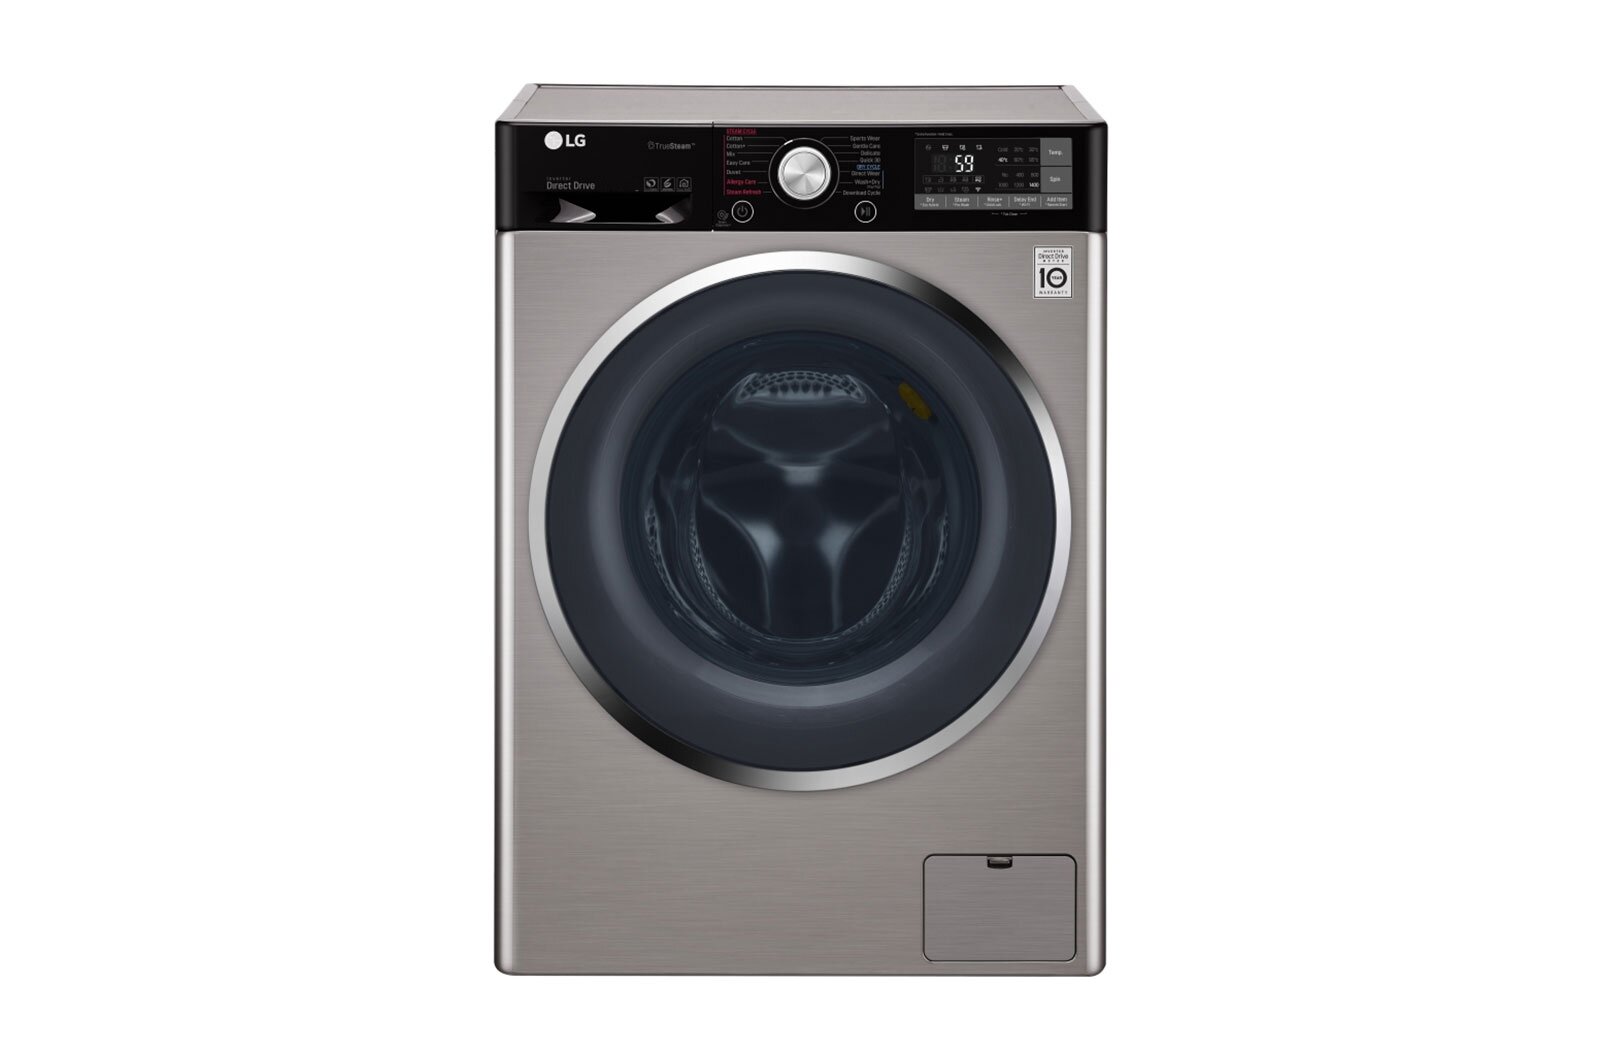 Review: LG Washer and Dryer Wash Every / Dry) Smart Living 7kg — Day (10.5kg